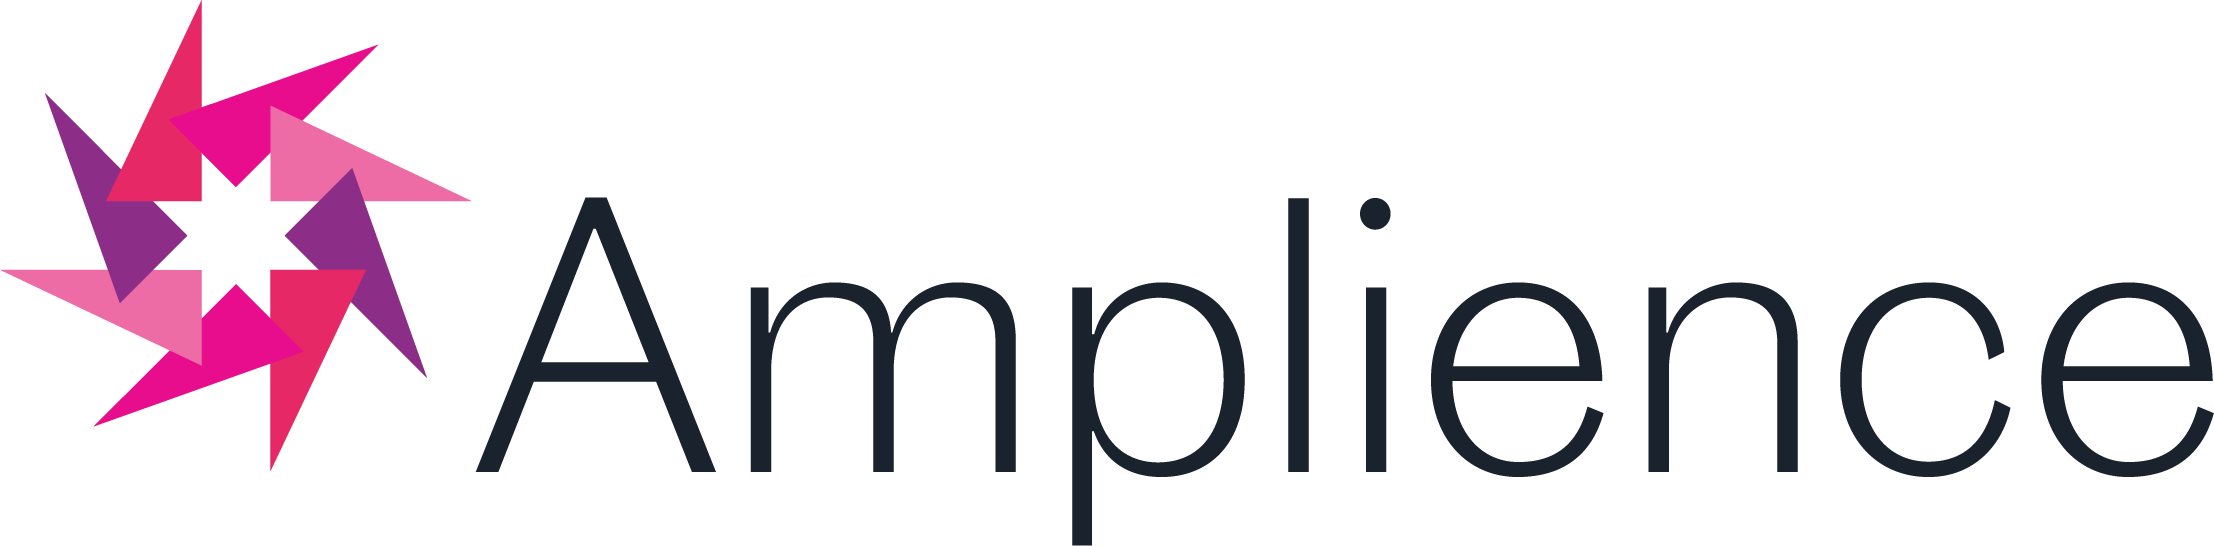 Amplience logo featuring graphic of multiple isosceles triangles in pink, red, and purple forming a star shape within center negative space, black sans serif text for brand name